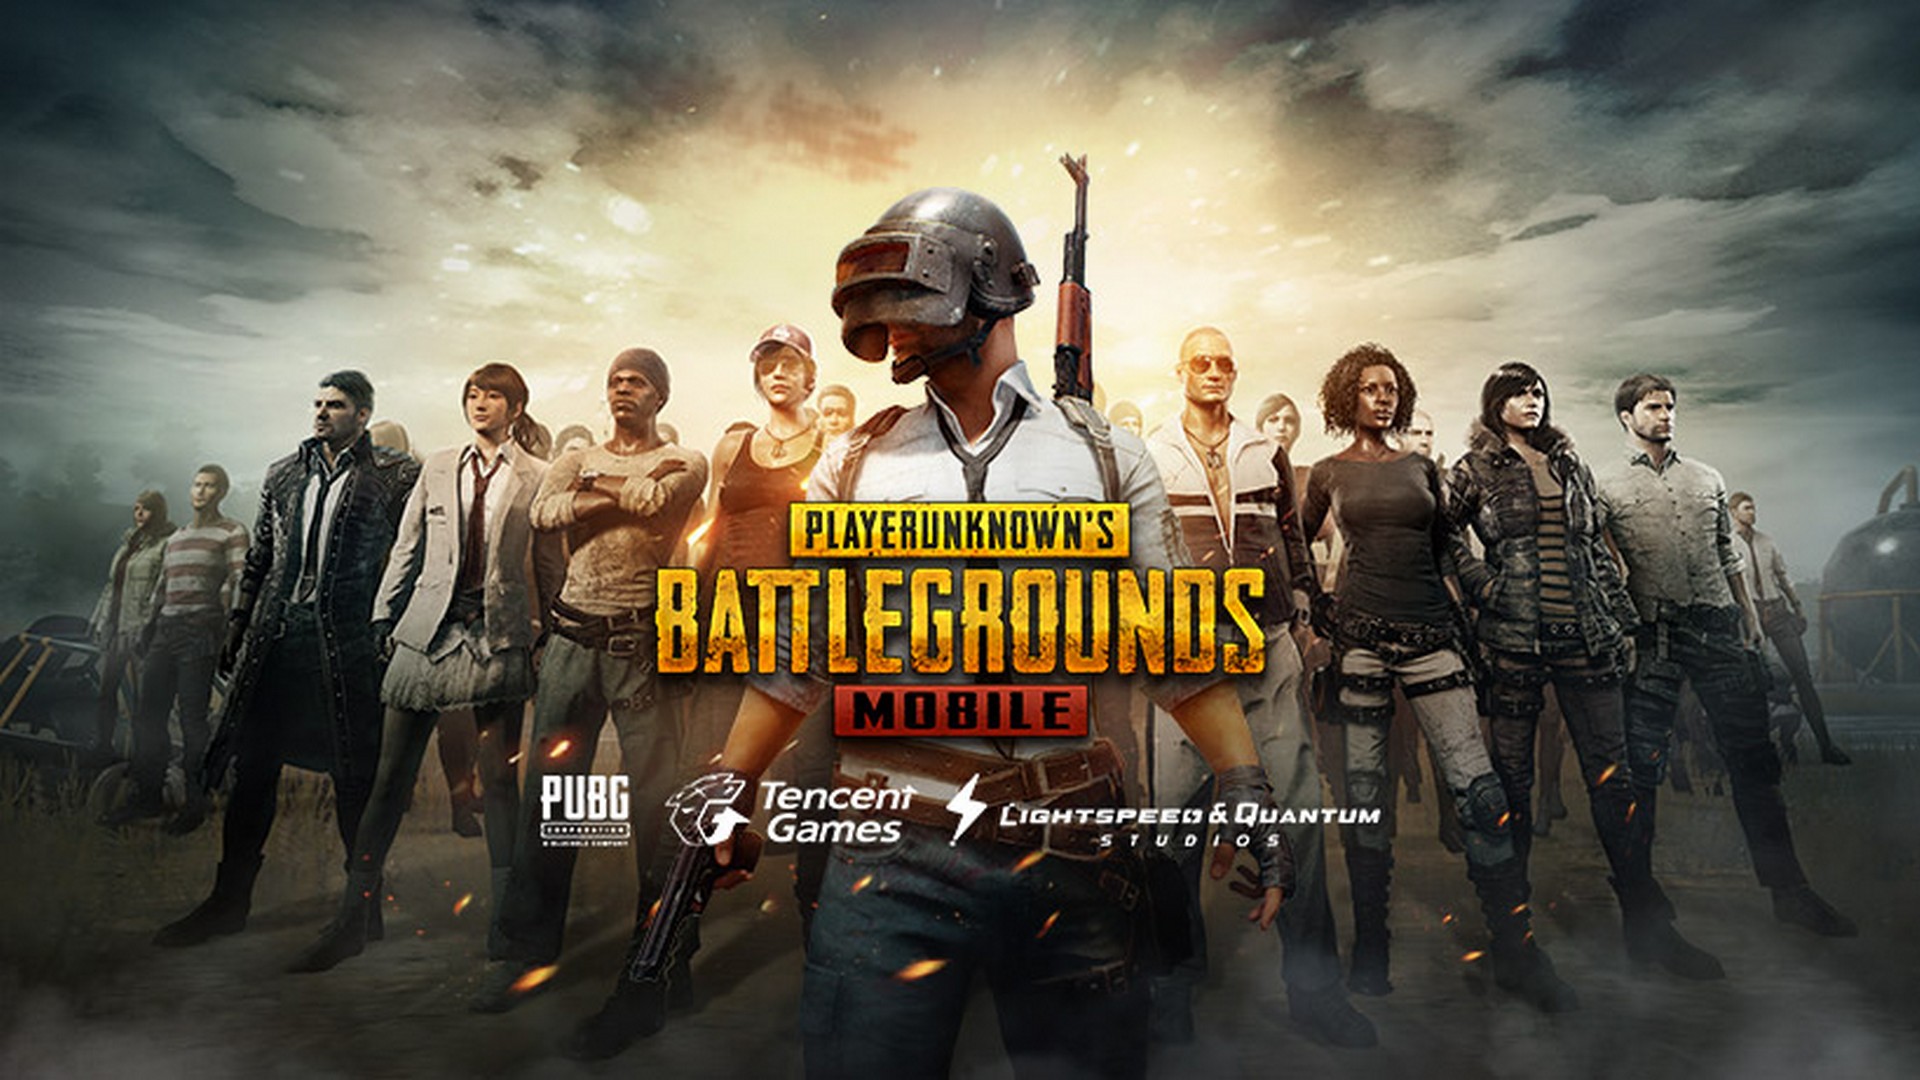 Wallpaper PUBG with resolution 1920X1080 pixel. You can use this wallpaper as background for your desktop Computer Screensavers, Android or iPhone smartphones